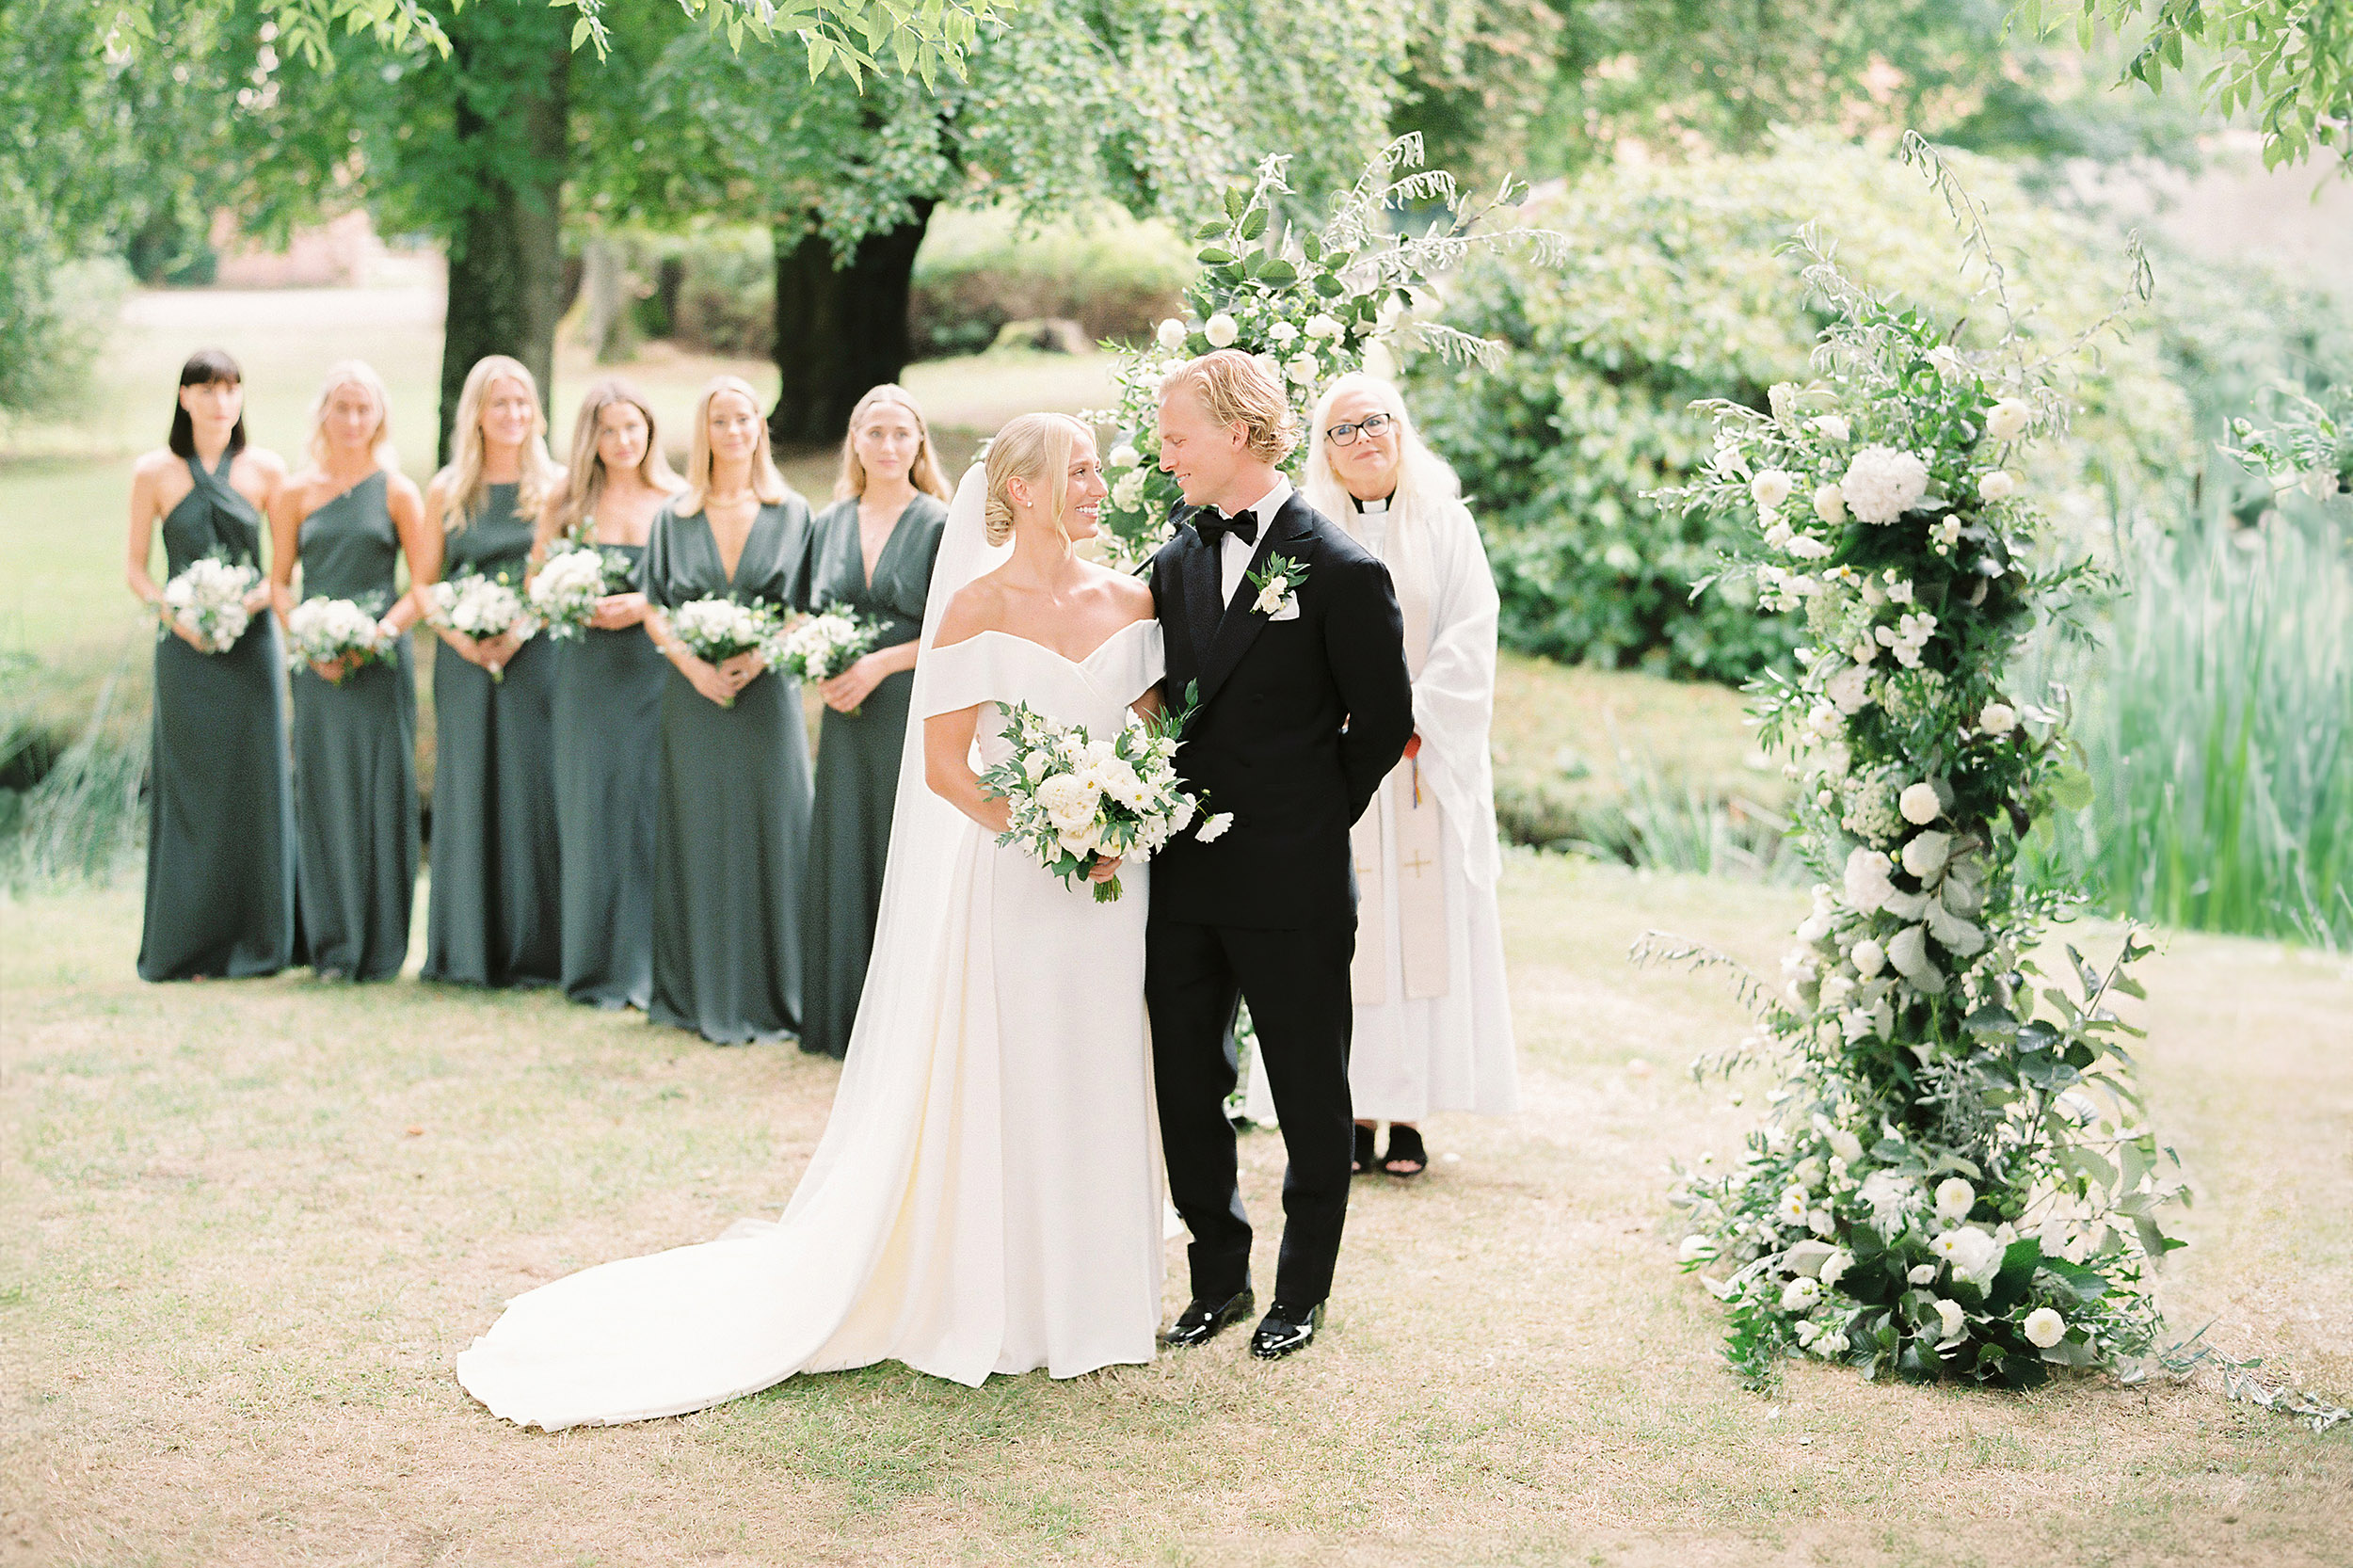 The bride and groom standing in front of a large floral arch in the garden at Jordberga Skåne.